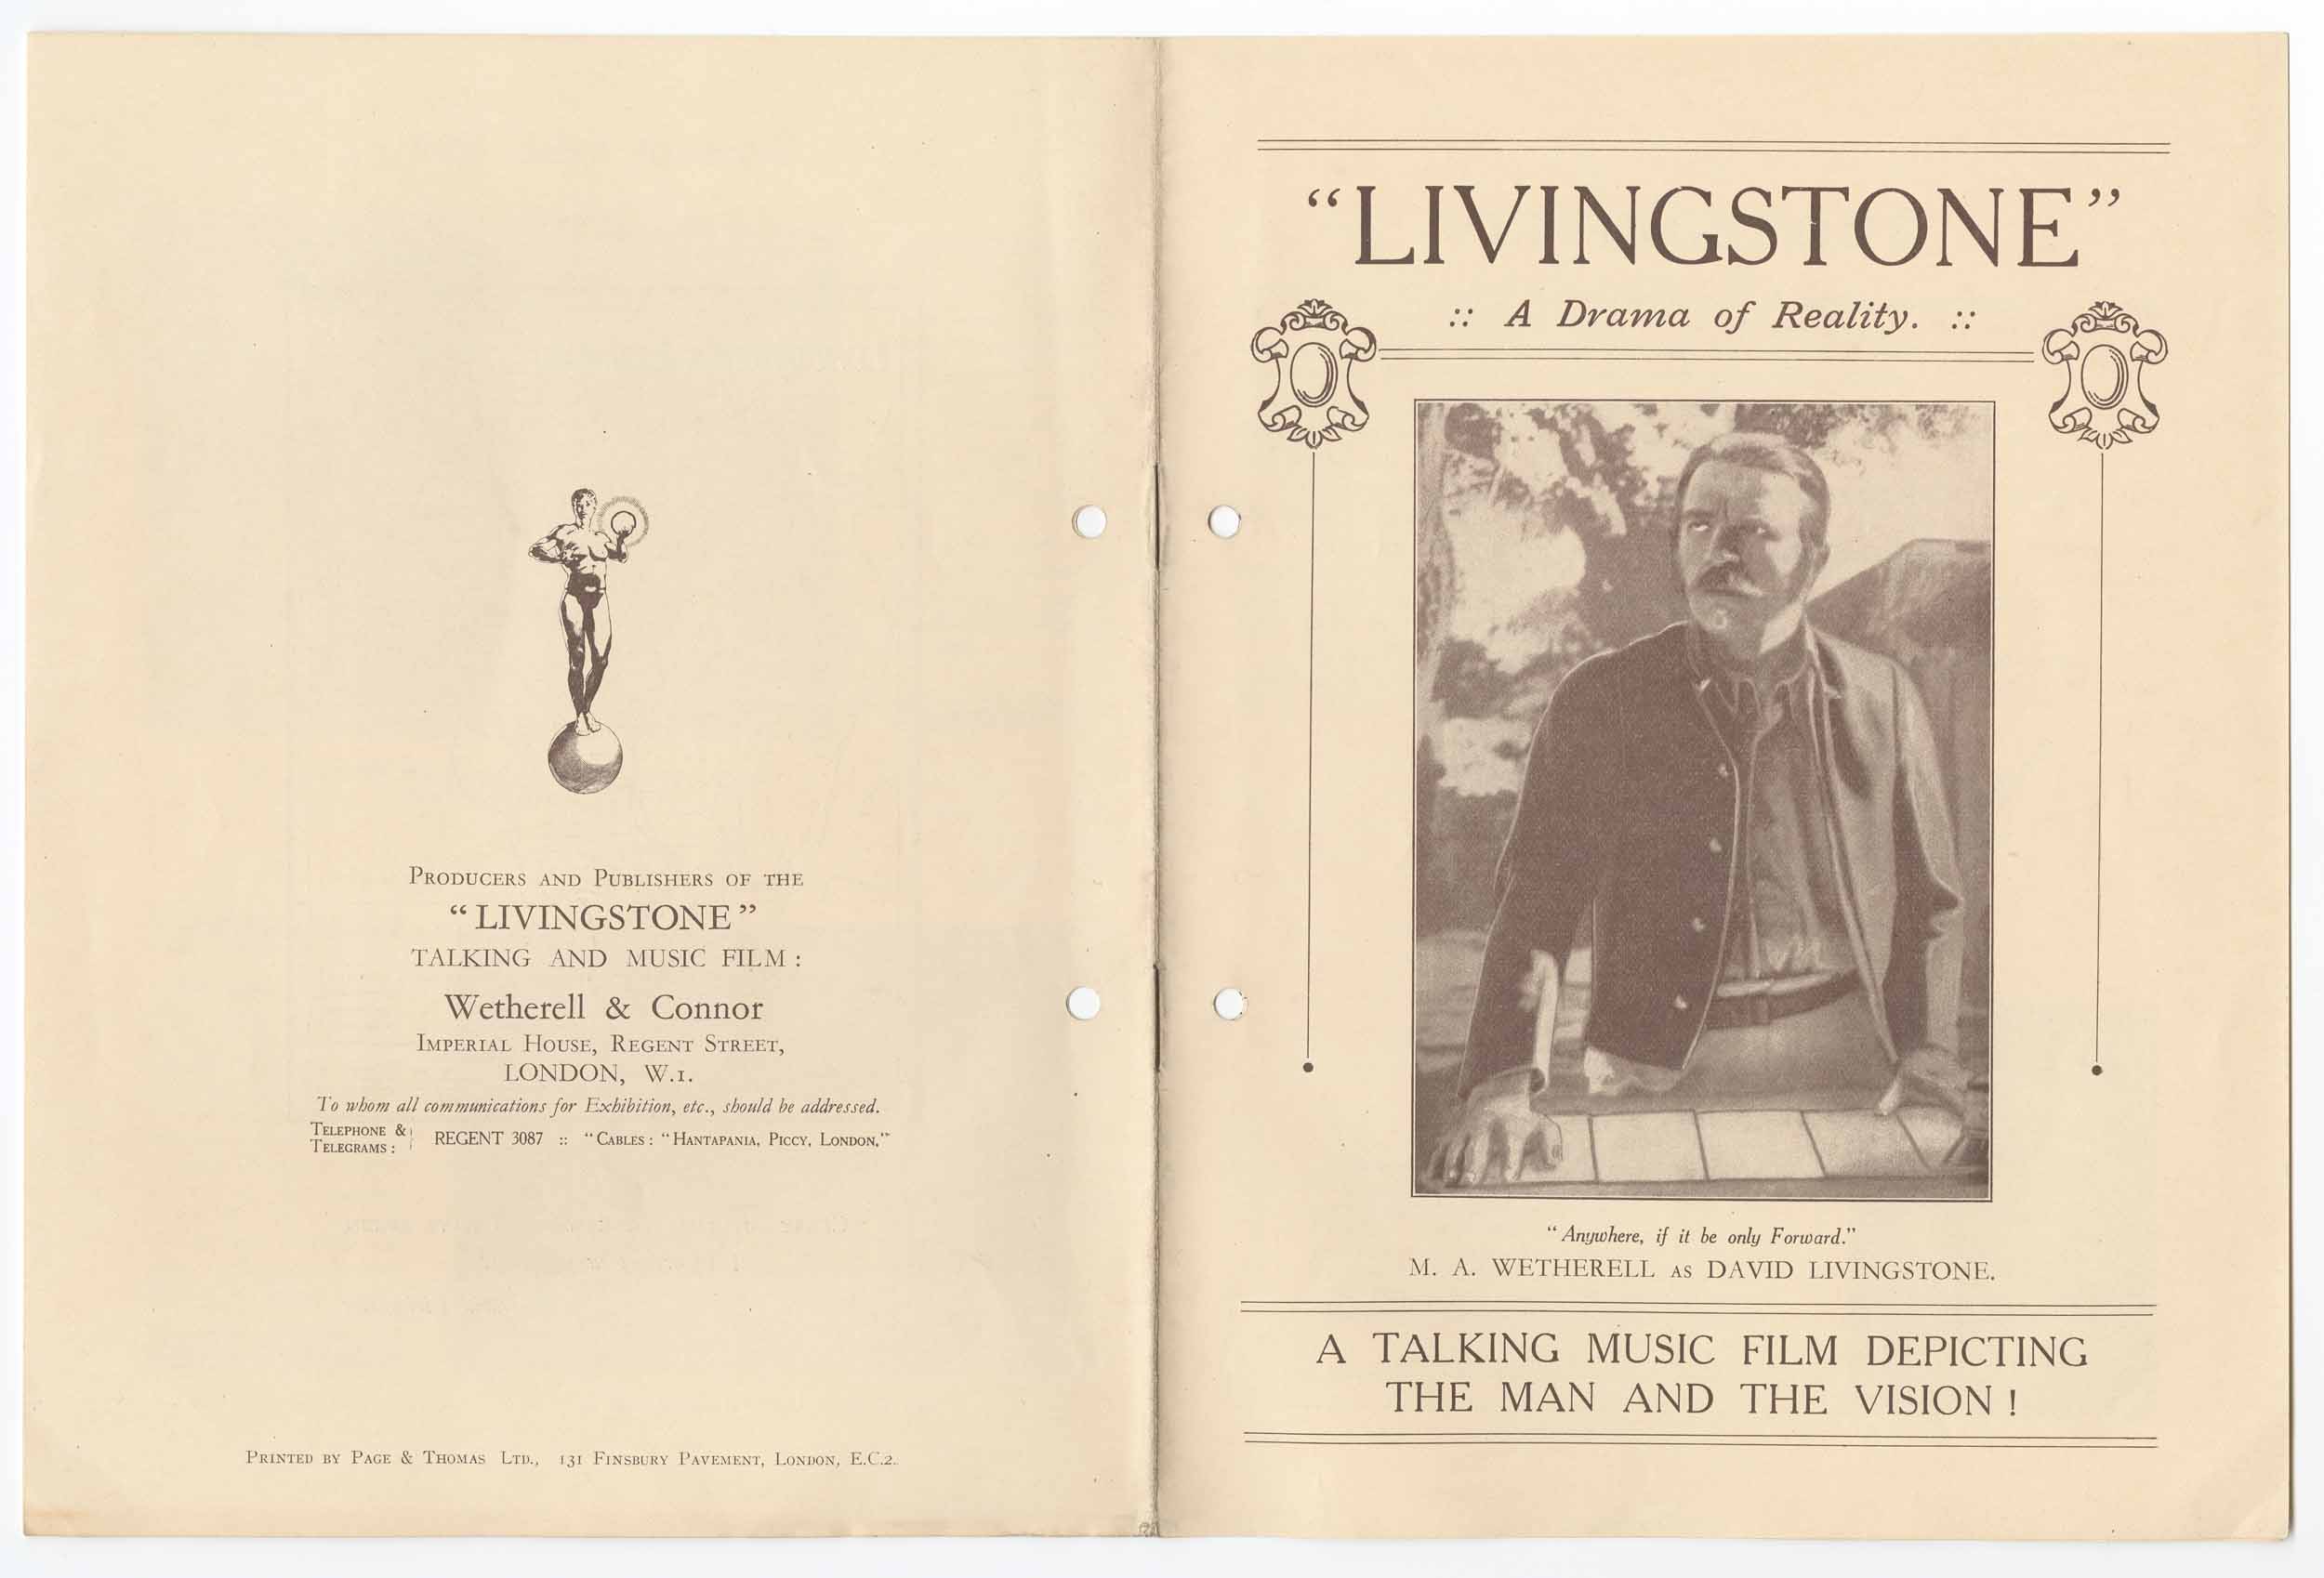 Promotional Booklet for Livingstone: A Drama of Reality (Film), 1925, by Hero Films Ltd. Copyright National Library of Scotland. Creative Commons Share-alike 2.5 UK: Scotland (https://creativecommons.org/licenses/by-nc-sa/2.5/scotland/).